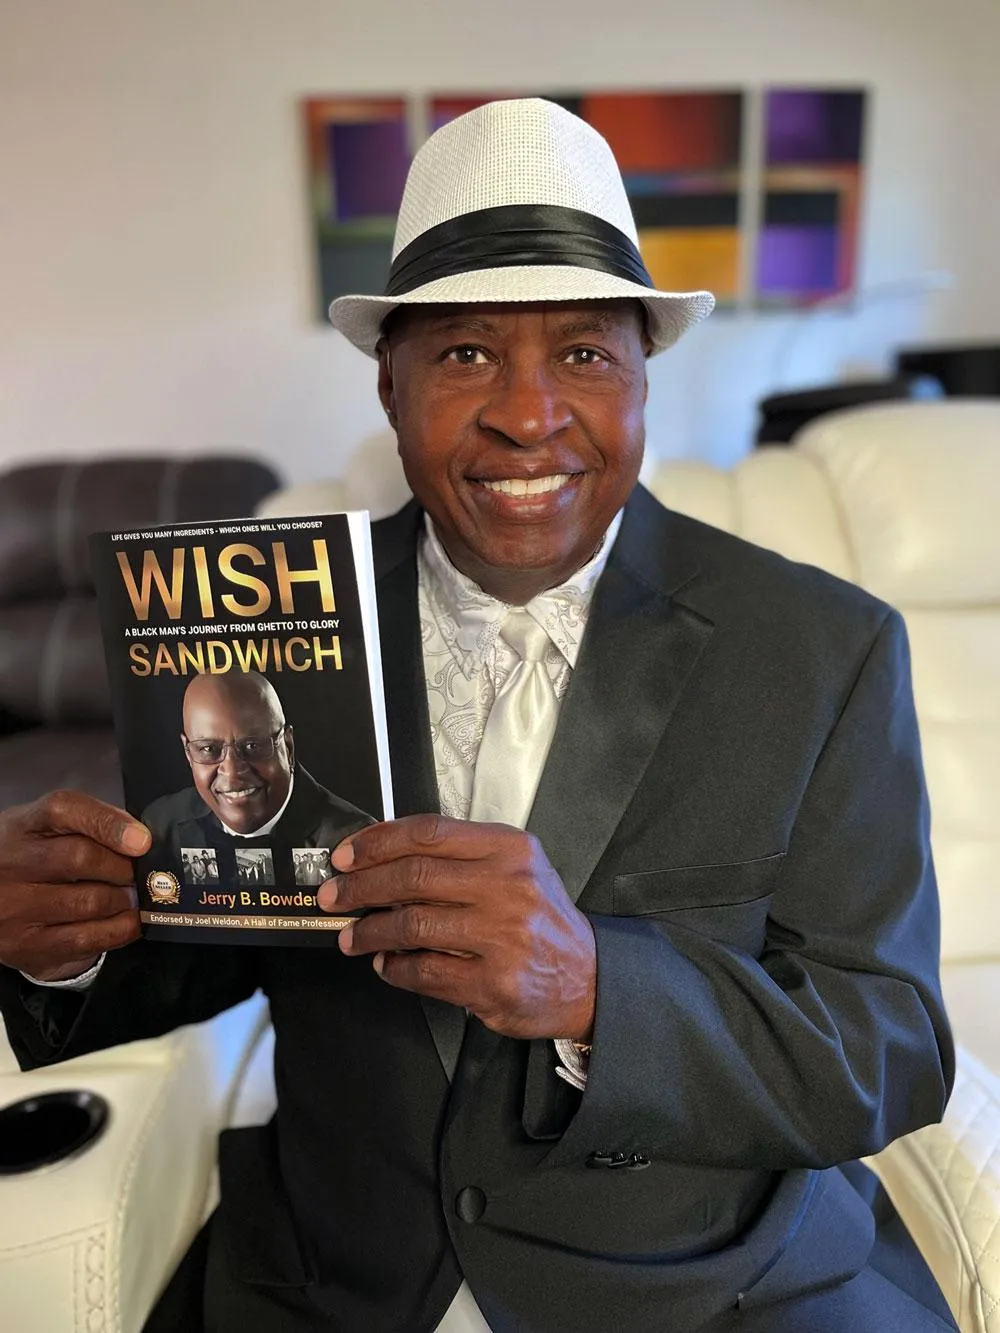 Picture of Jerry B. Bowden holding his book, Wish Sandwich